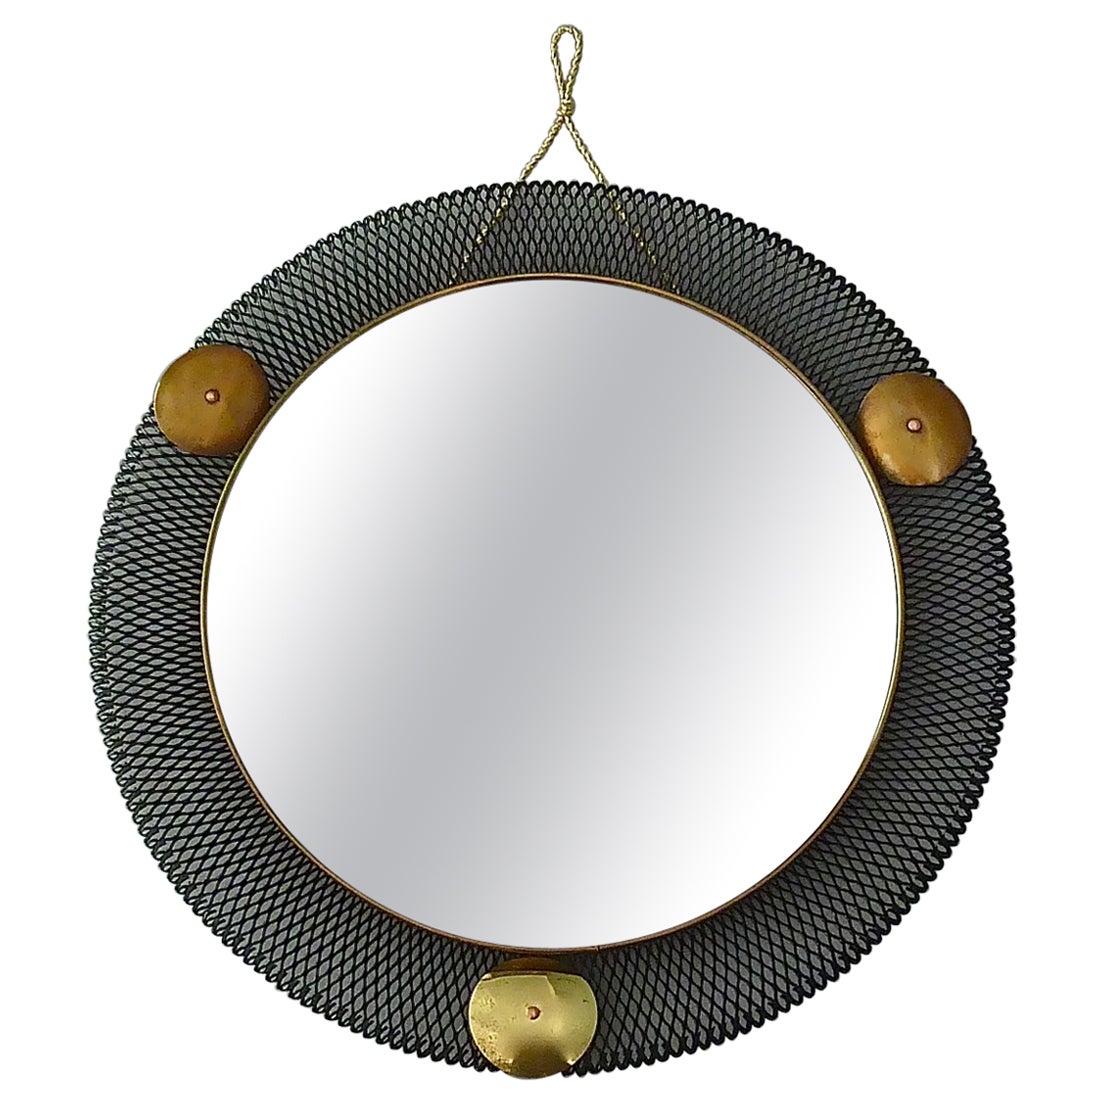 Round Black Midcentury Wall Mirror Brass Stretched Metal 1955 Mategot Biny Style For Sale